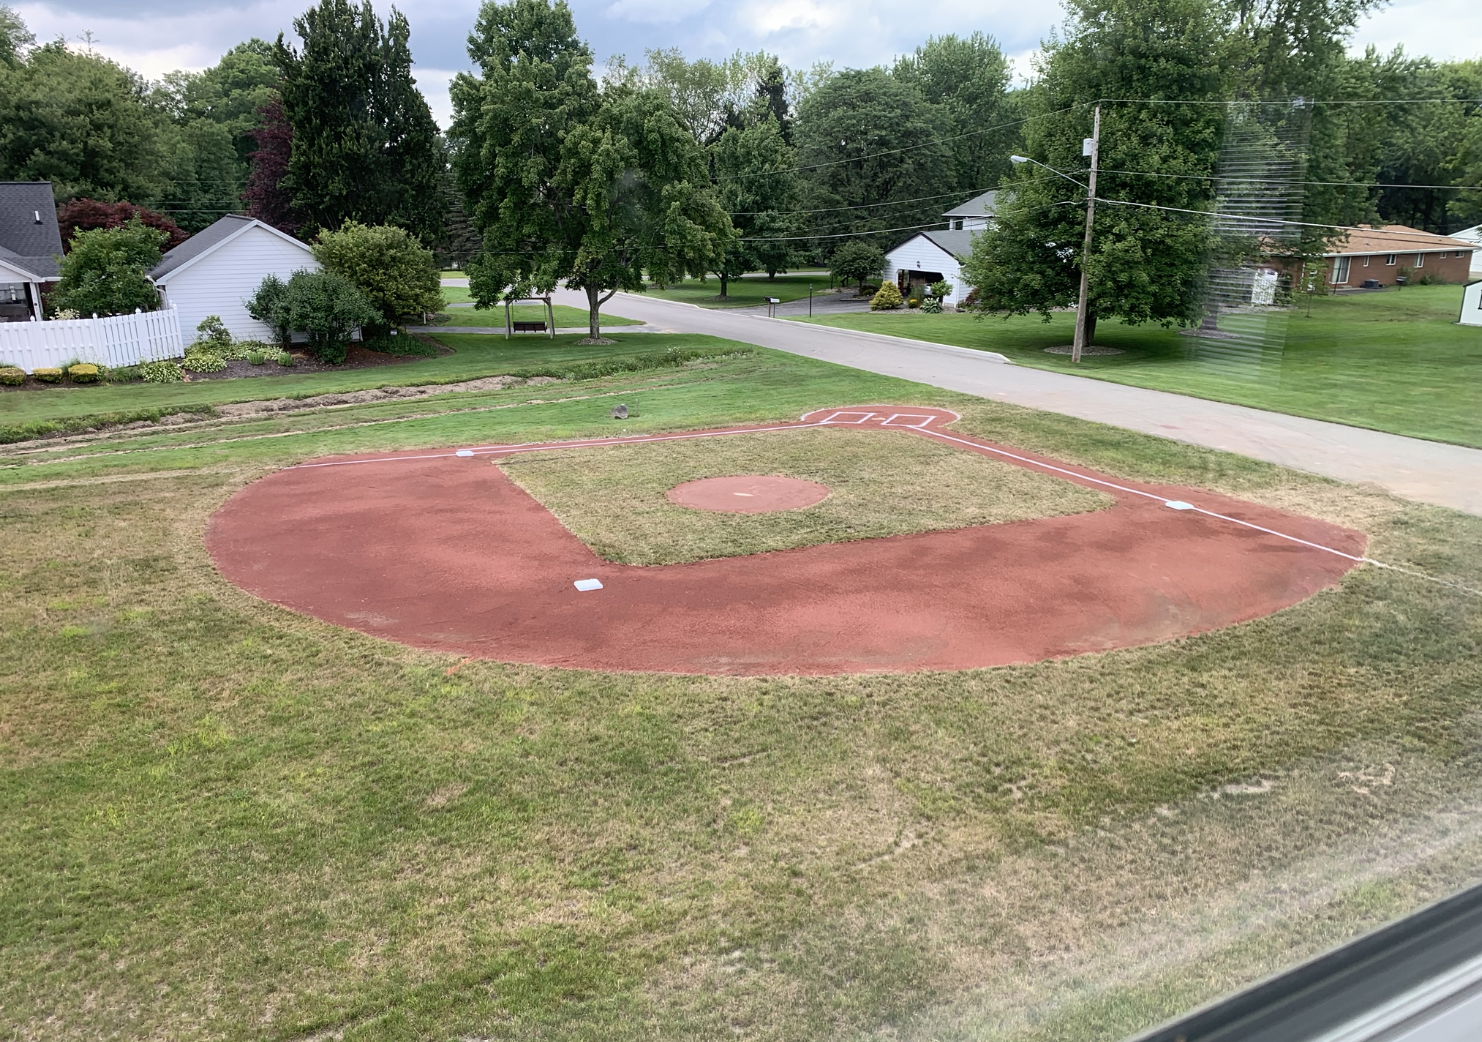 Dad Spends 30k On Backyard Baseball Field For 5 Year Old Son